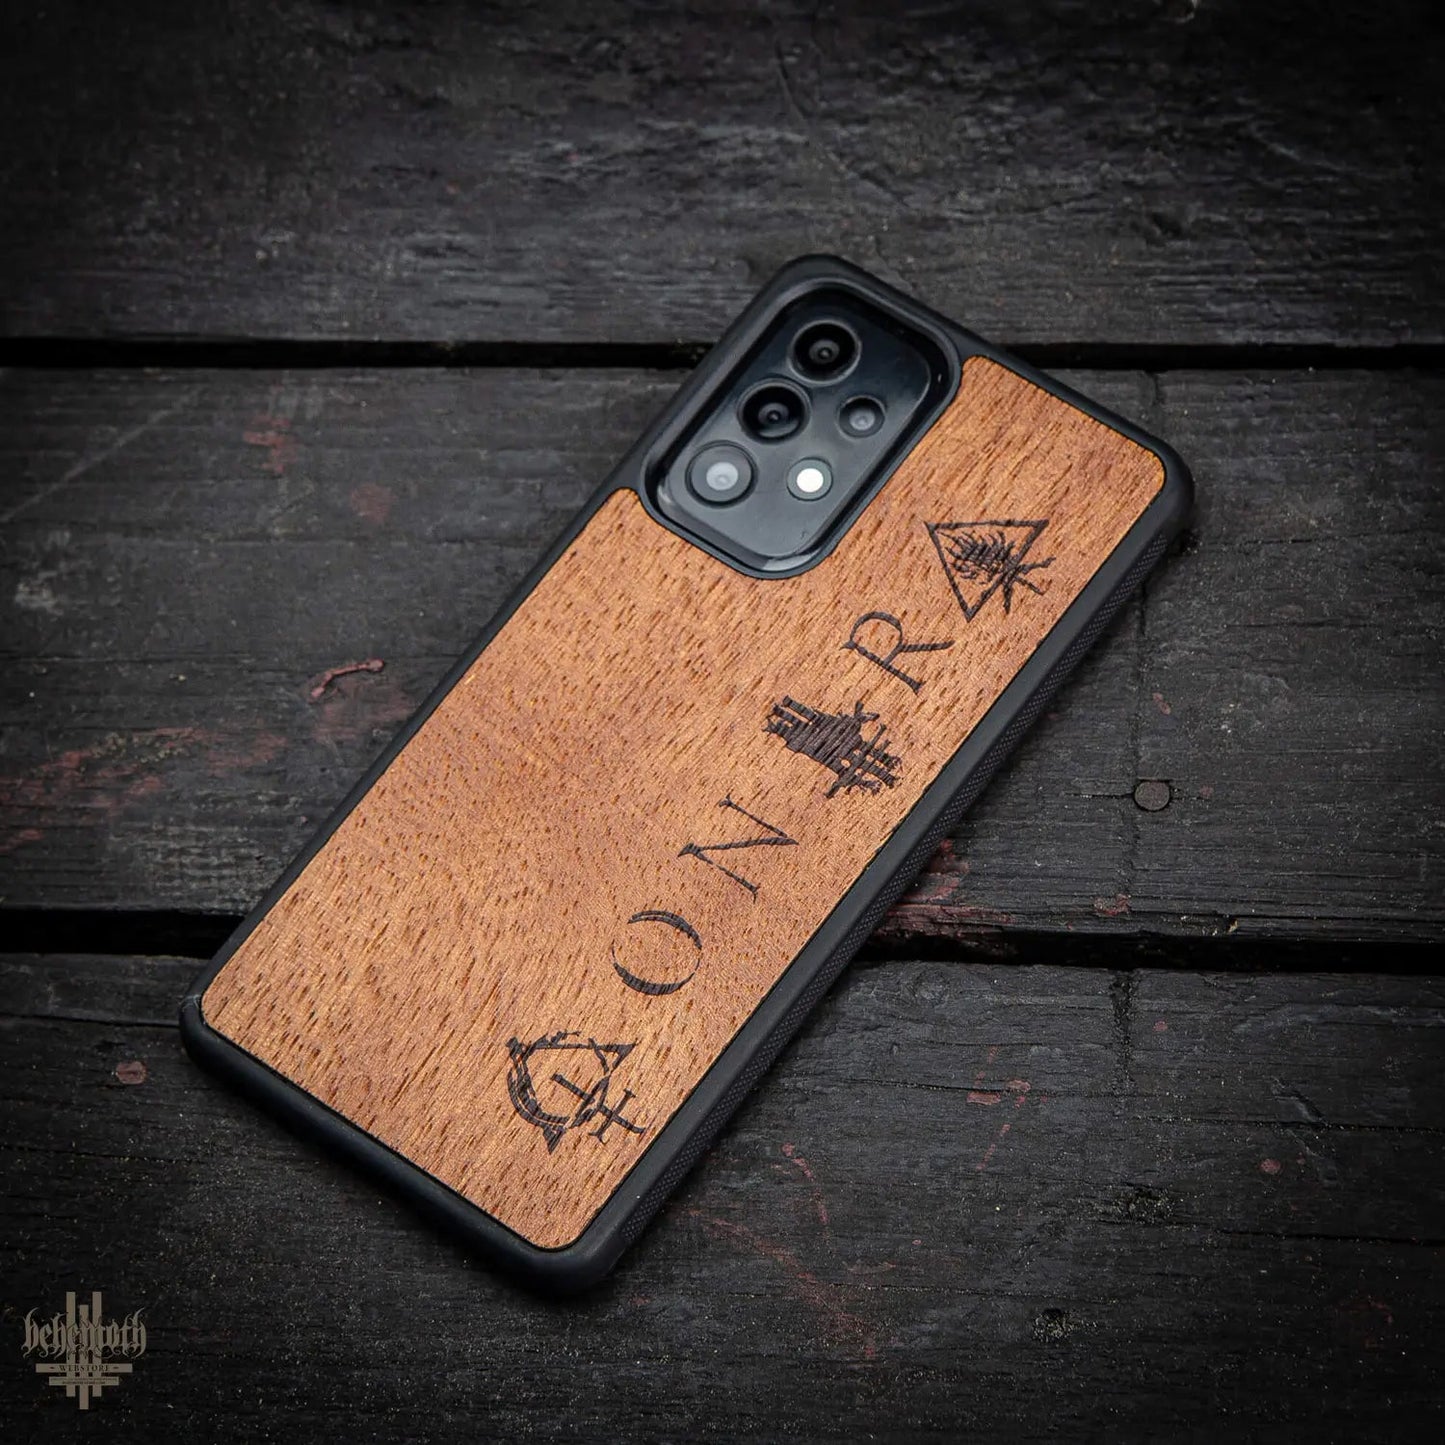 Samsung Galaxy A53 5G case with wood finishing and Behemoth 'CONTRA' logo